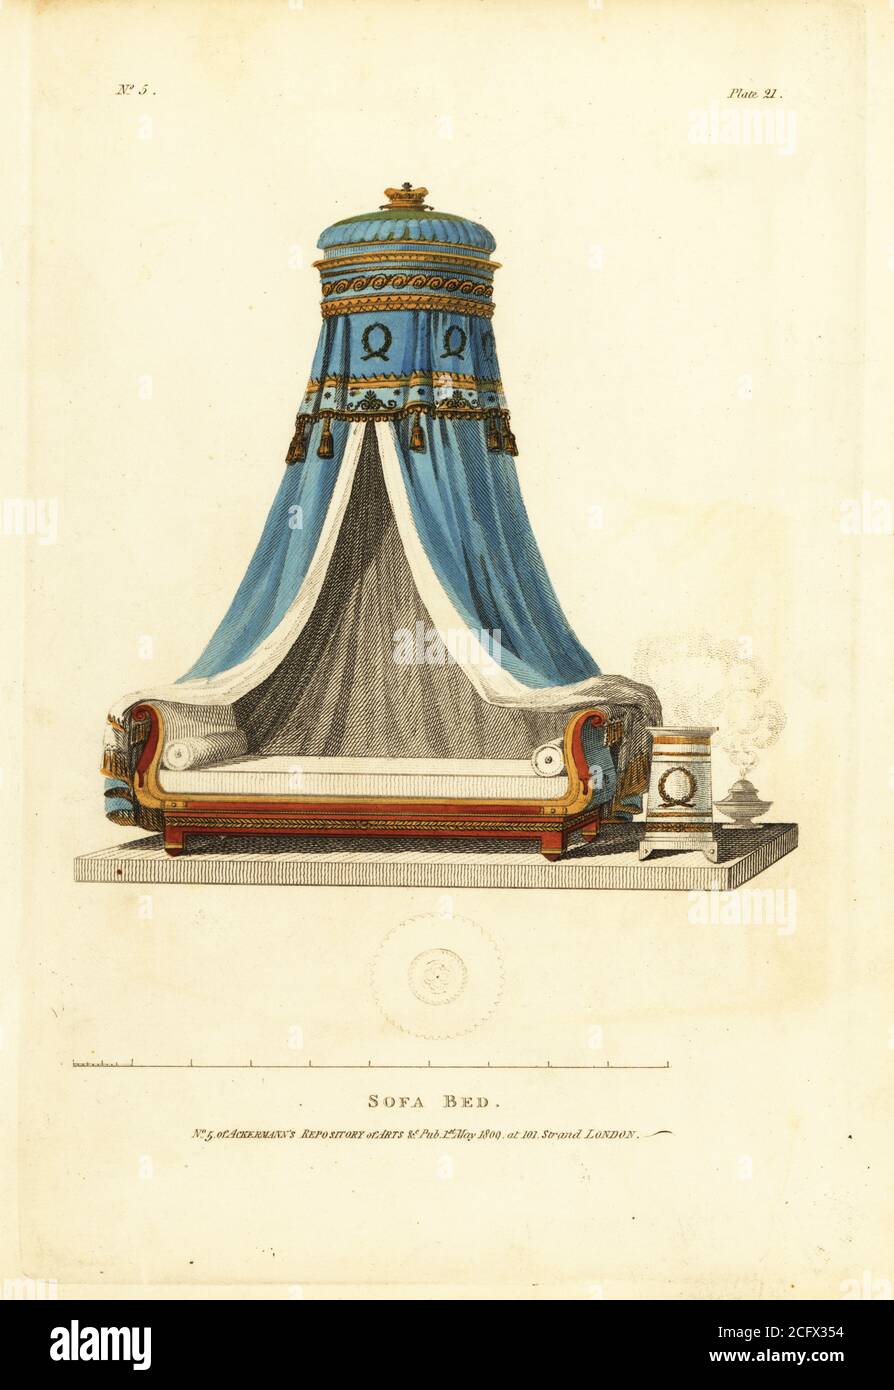 Sofa or French bed, 1809. Sofa with mahogany frame ornamented in gilt, white satin cushions and bolster, blue velvet canopy under a blue satin dome with gold moldings and Vitrurian scroll in the frieze. Handcoloured copperplate engraving from The Upholsterer's and Cabinet-Maker's Repository consisting of seventy-six designs of modern and fashionable furniture, Rudolph Ackermann, London, 1830. Stock Photo